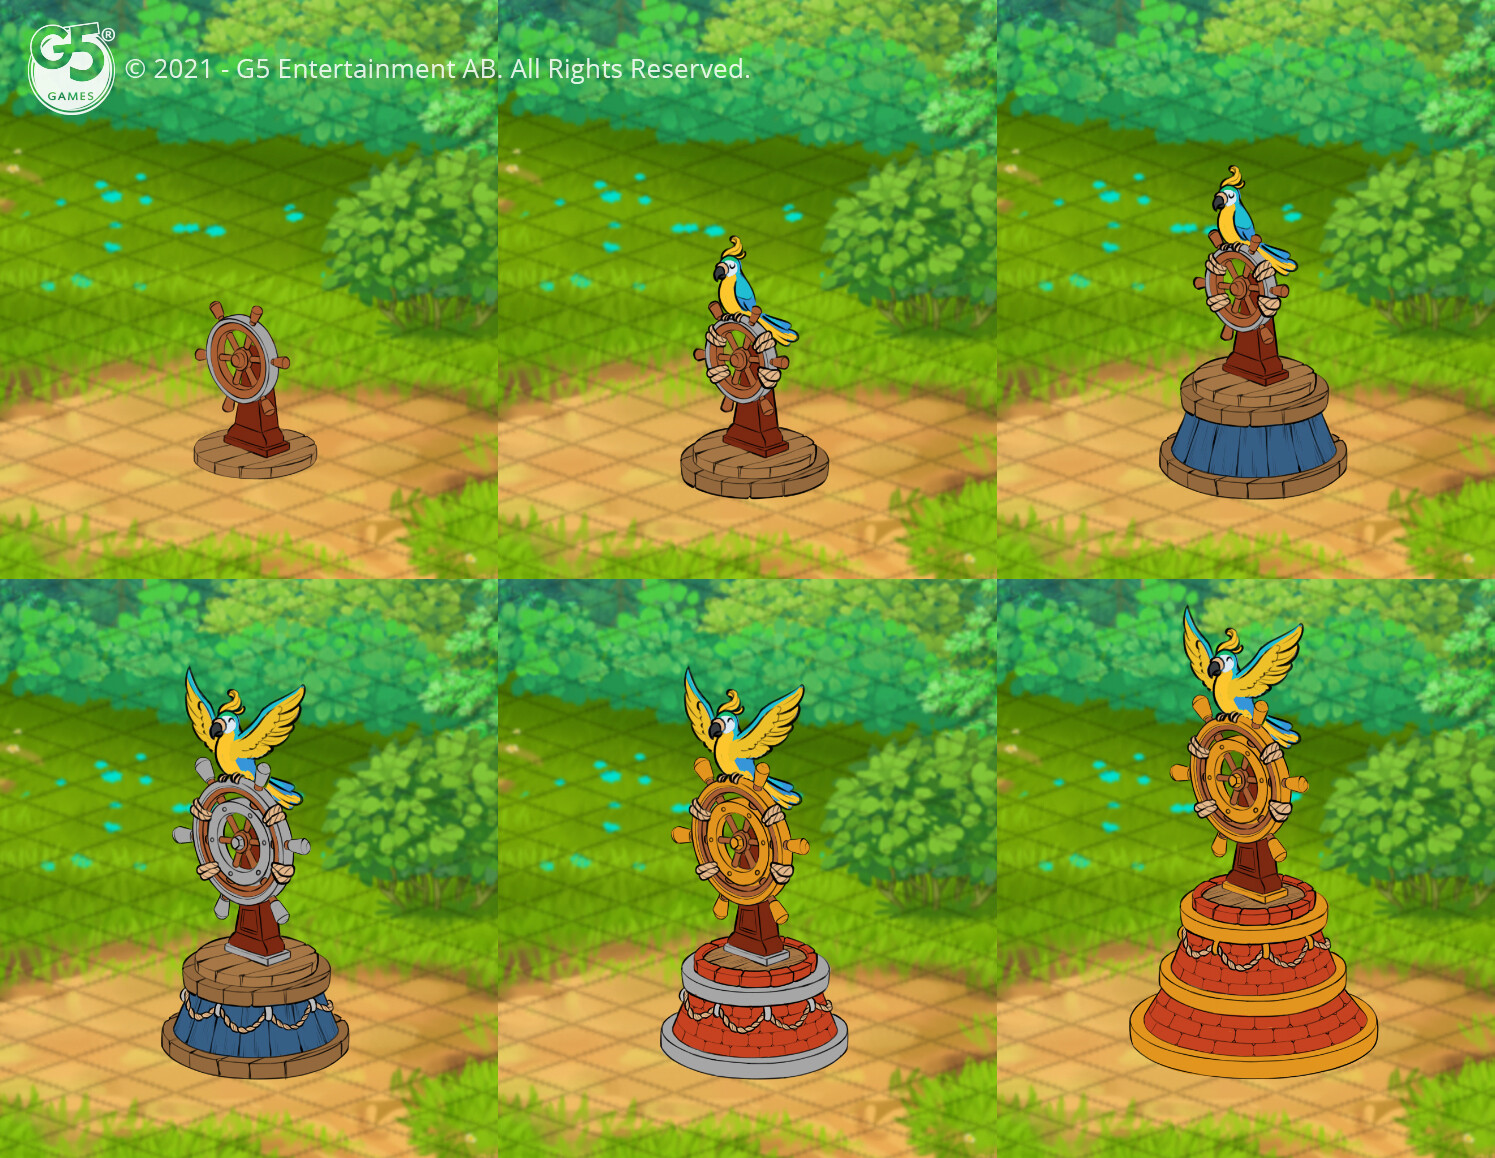 Statue concept for Treasure Seekers event.